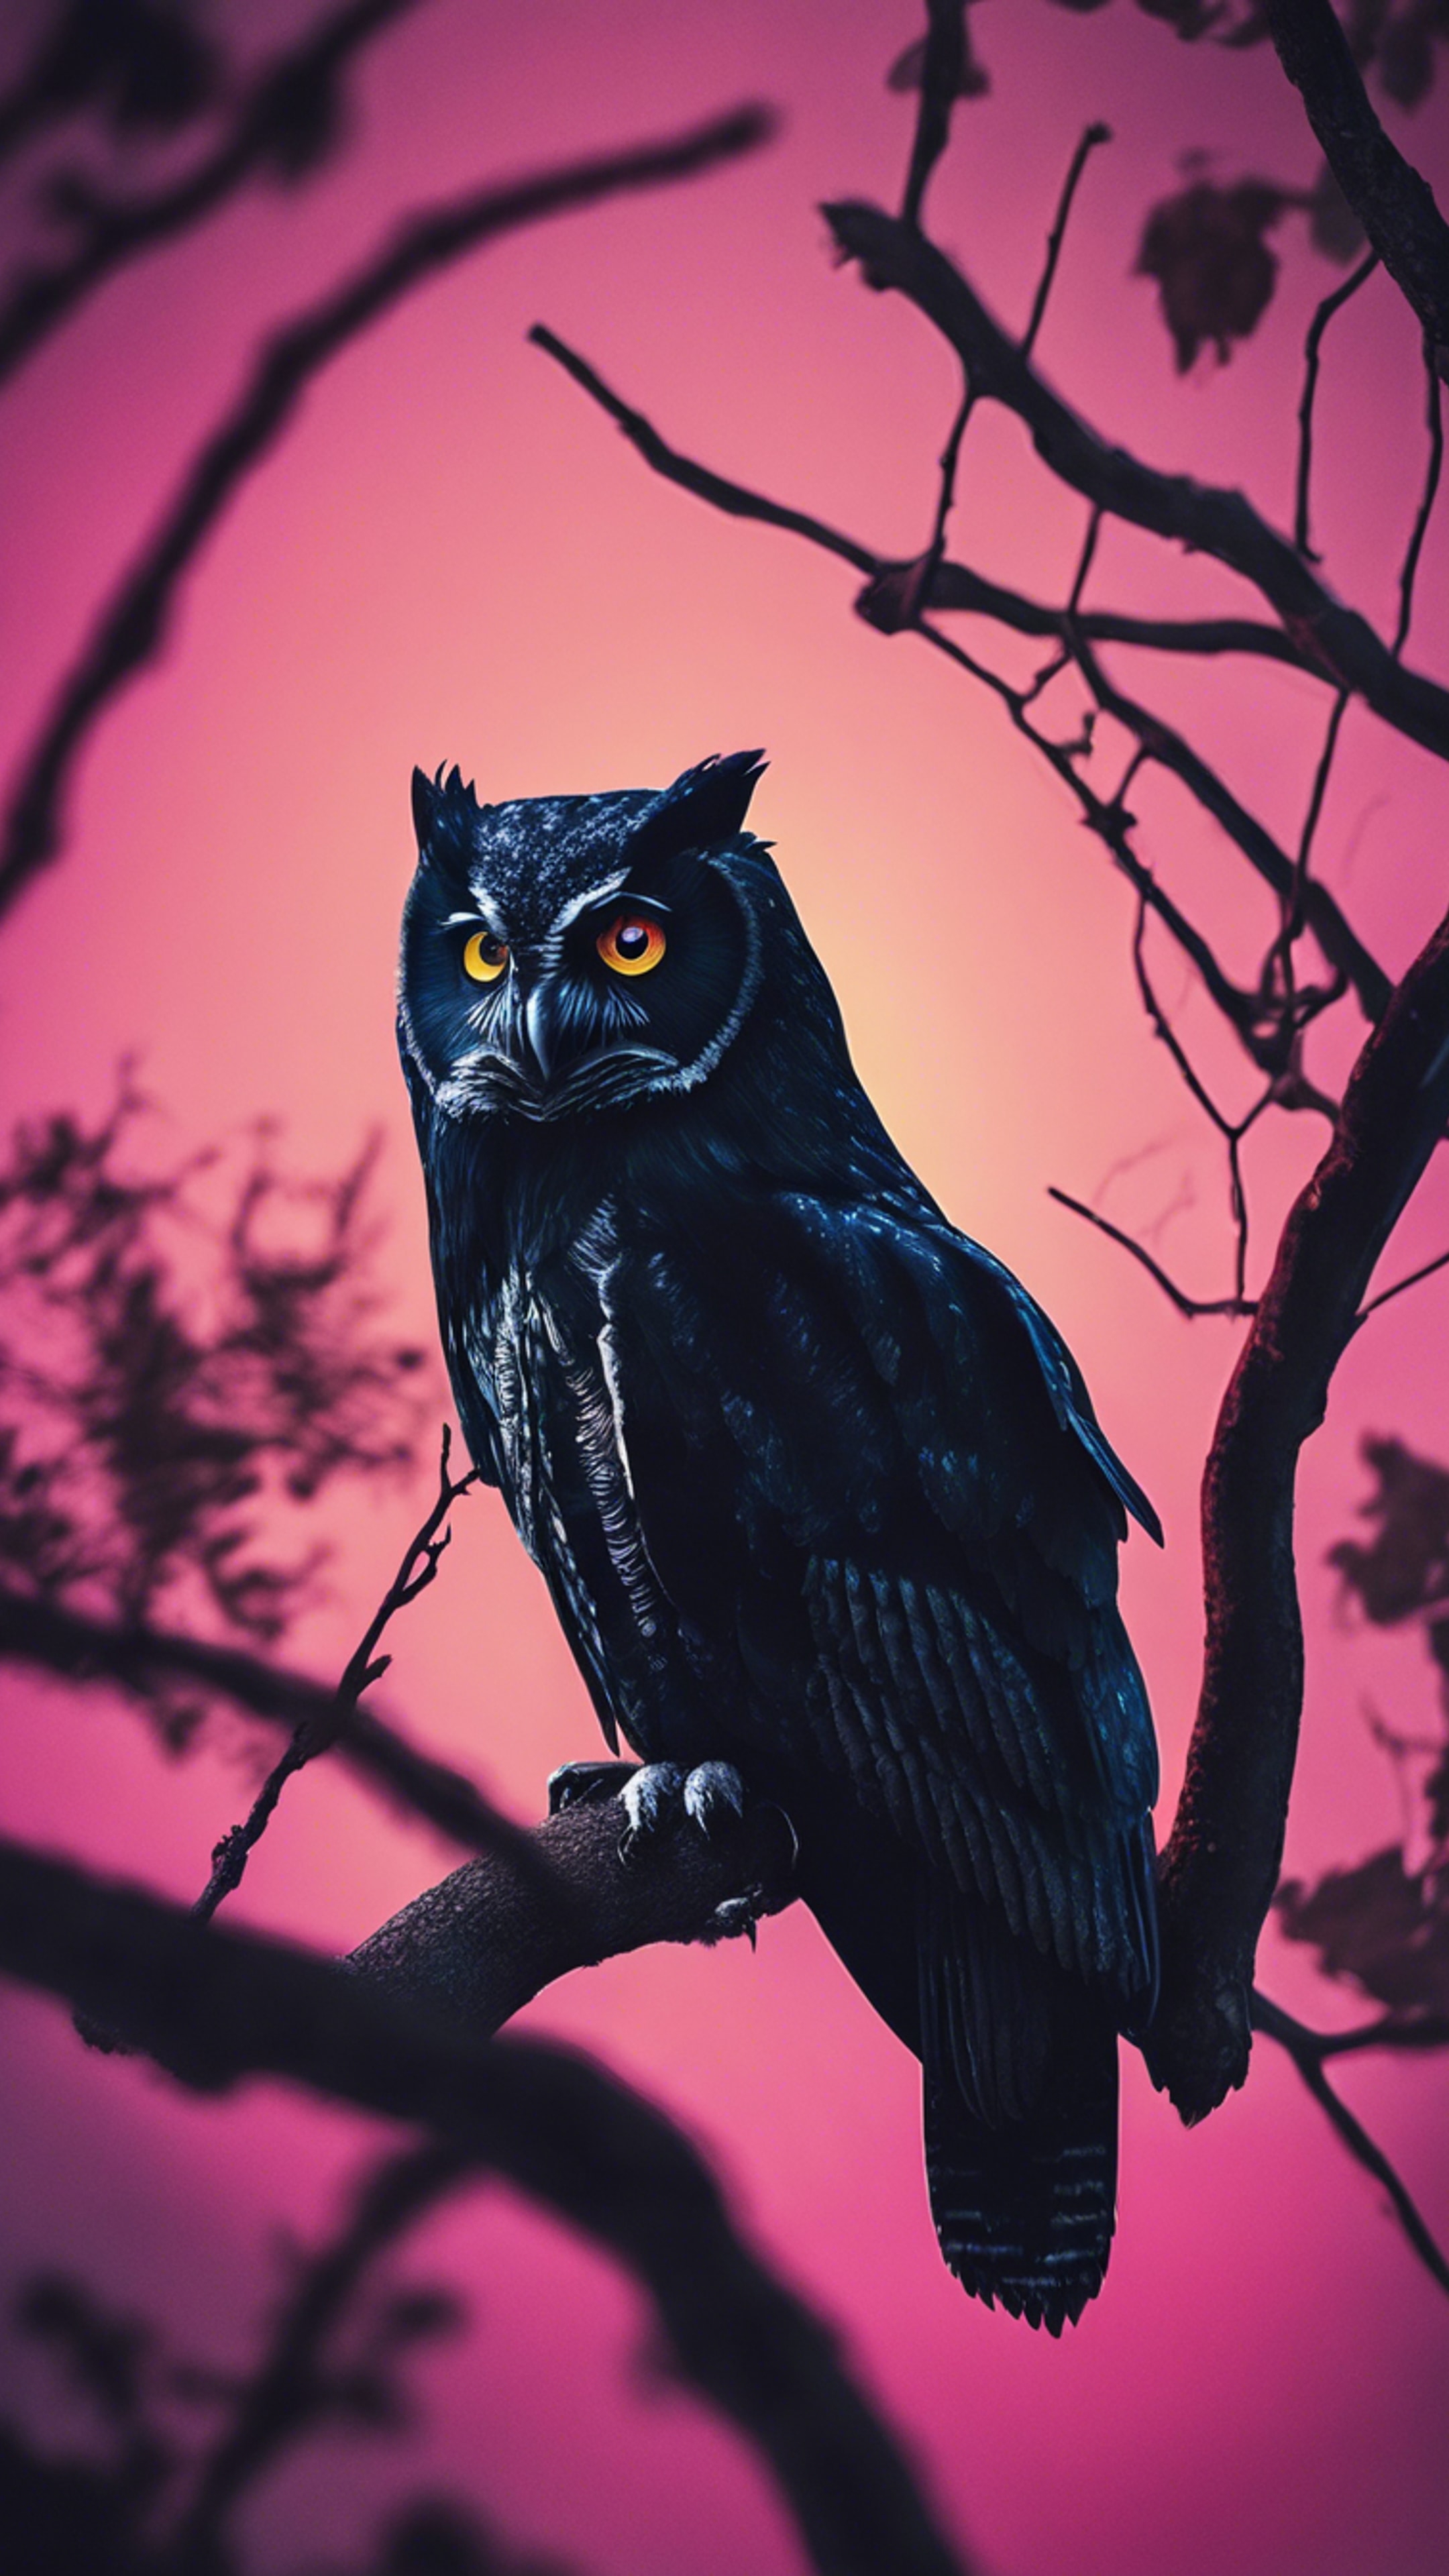 A pitch black owl, its eyes glowing in cool neon colors, perched on a tree branch on a moonless night. Behang[de9c9fccdafb4c81814c]